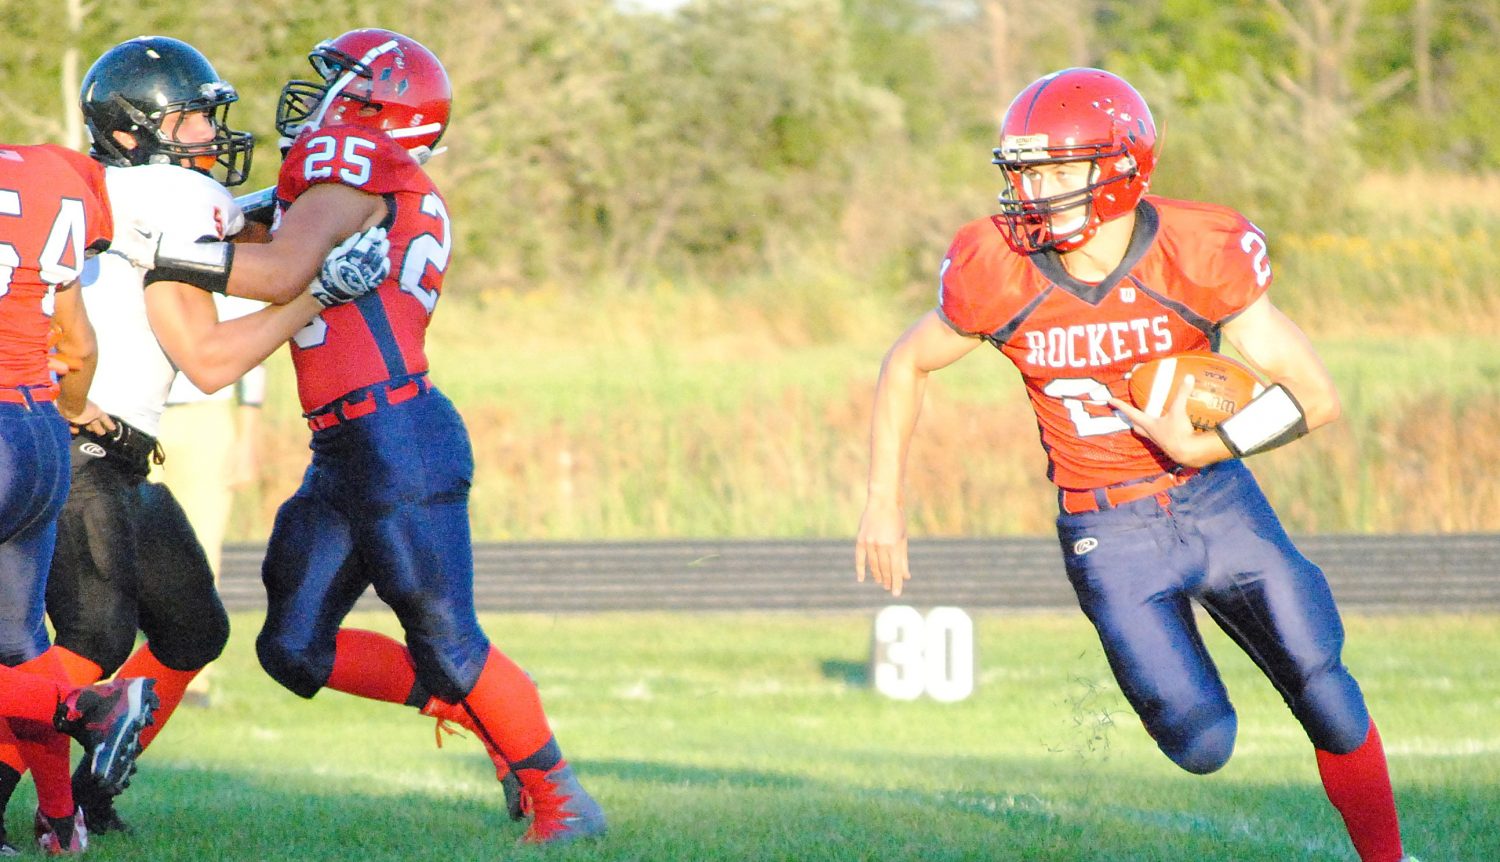 Spencer/Columbus running back Noah Zastrow, right, was named to the Wisconsin Football Coaches Association all-state first team as a utility player.